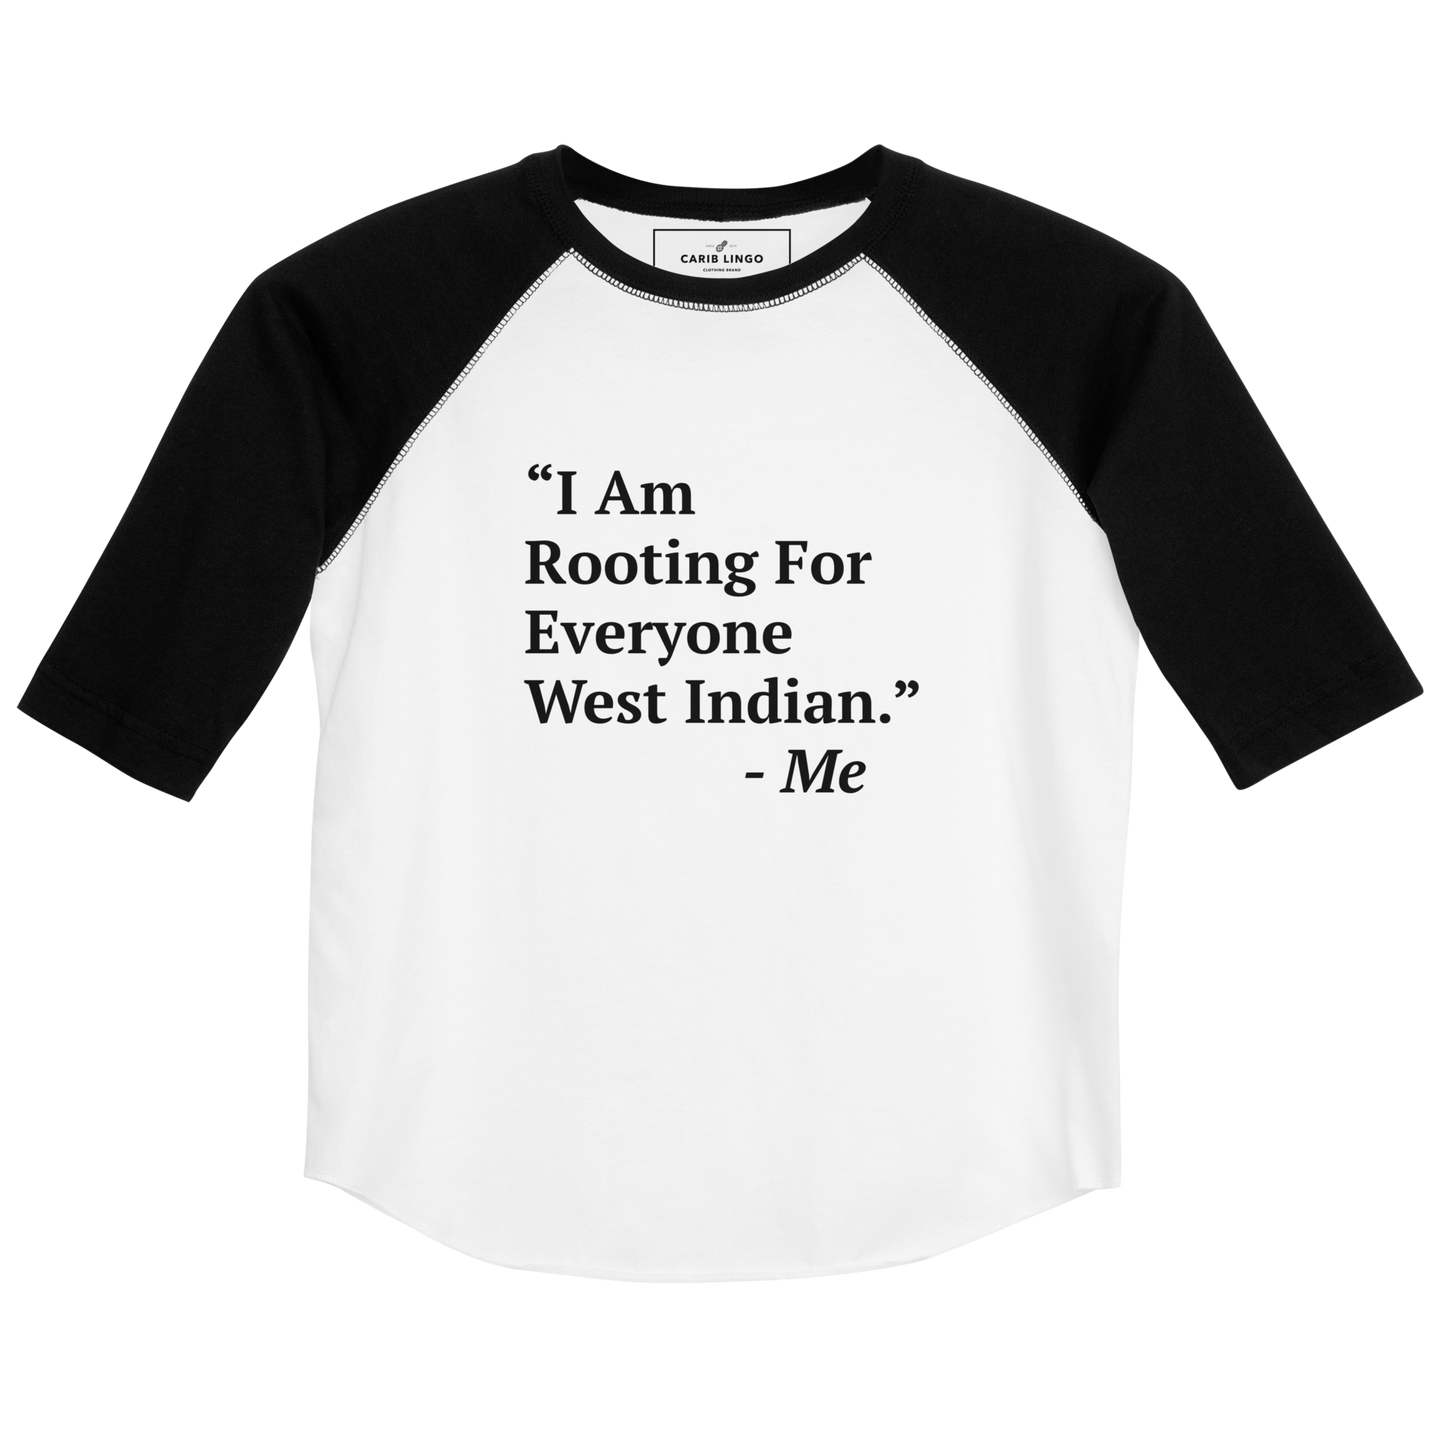 I Am Rooting: West Indian Youth baseball shirt